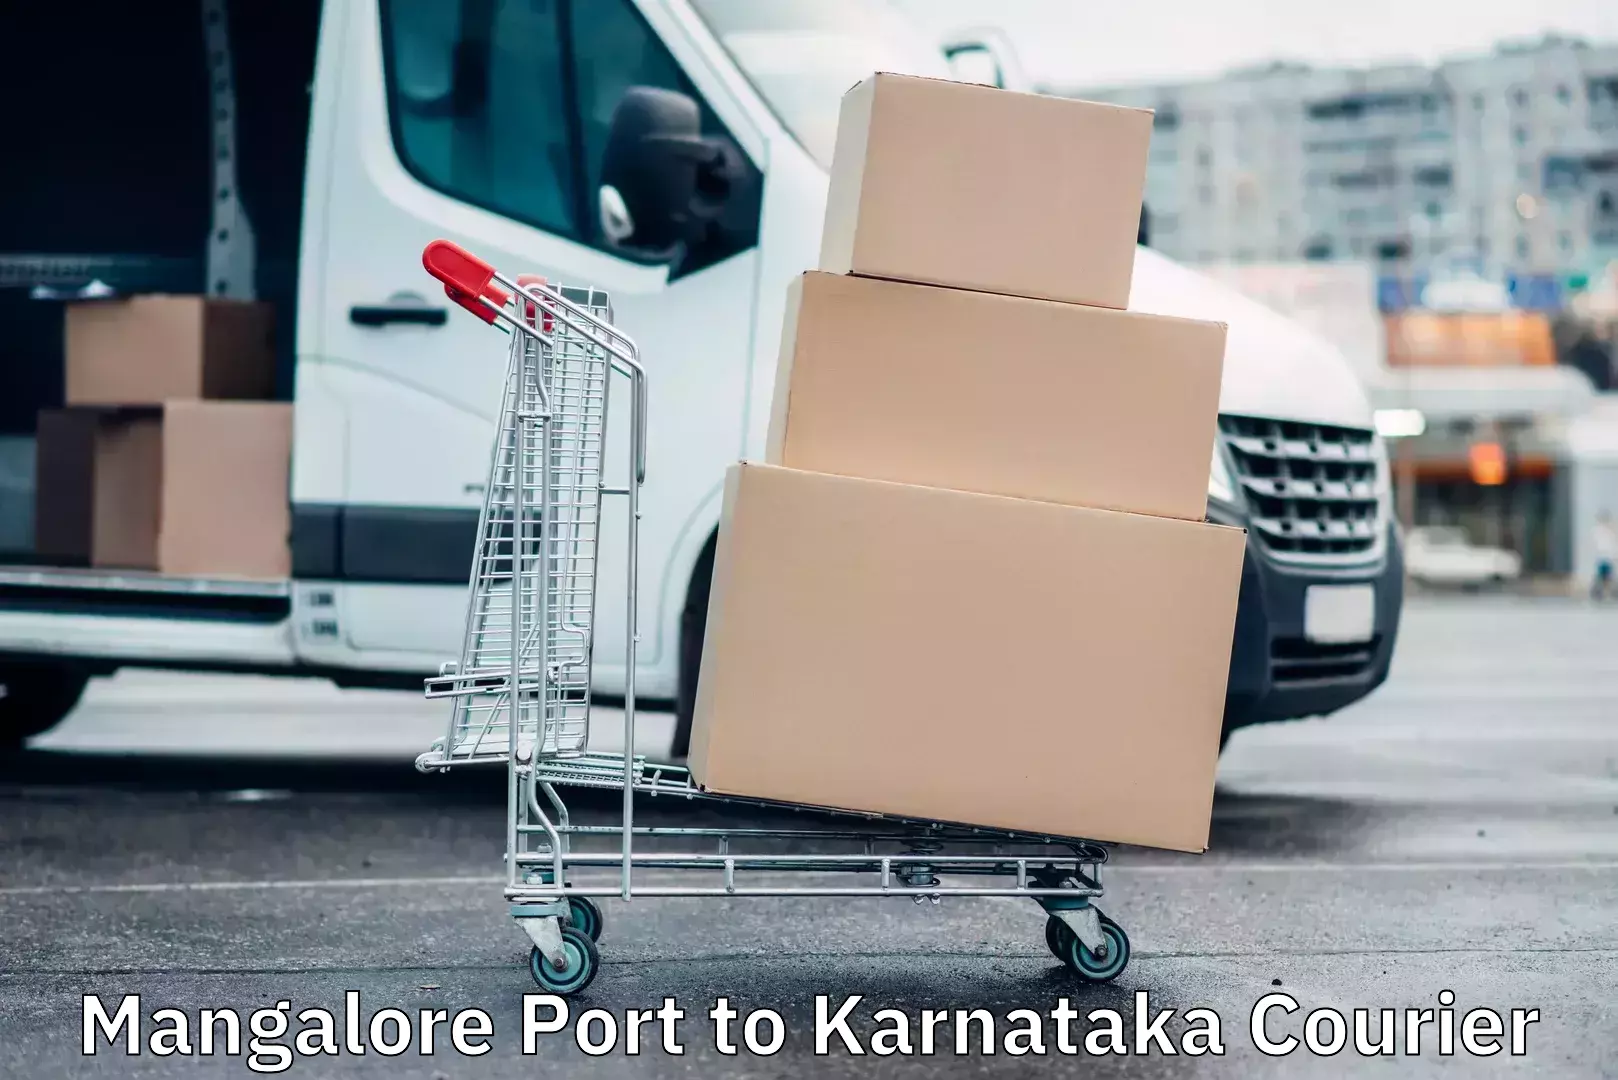 Corporate courier solutions in Mangalore Port to Karnataka